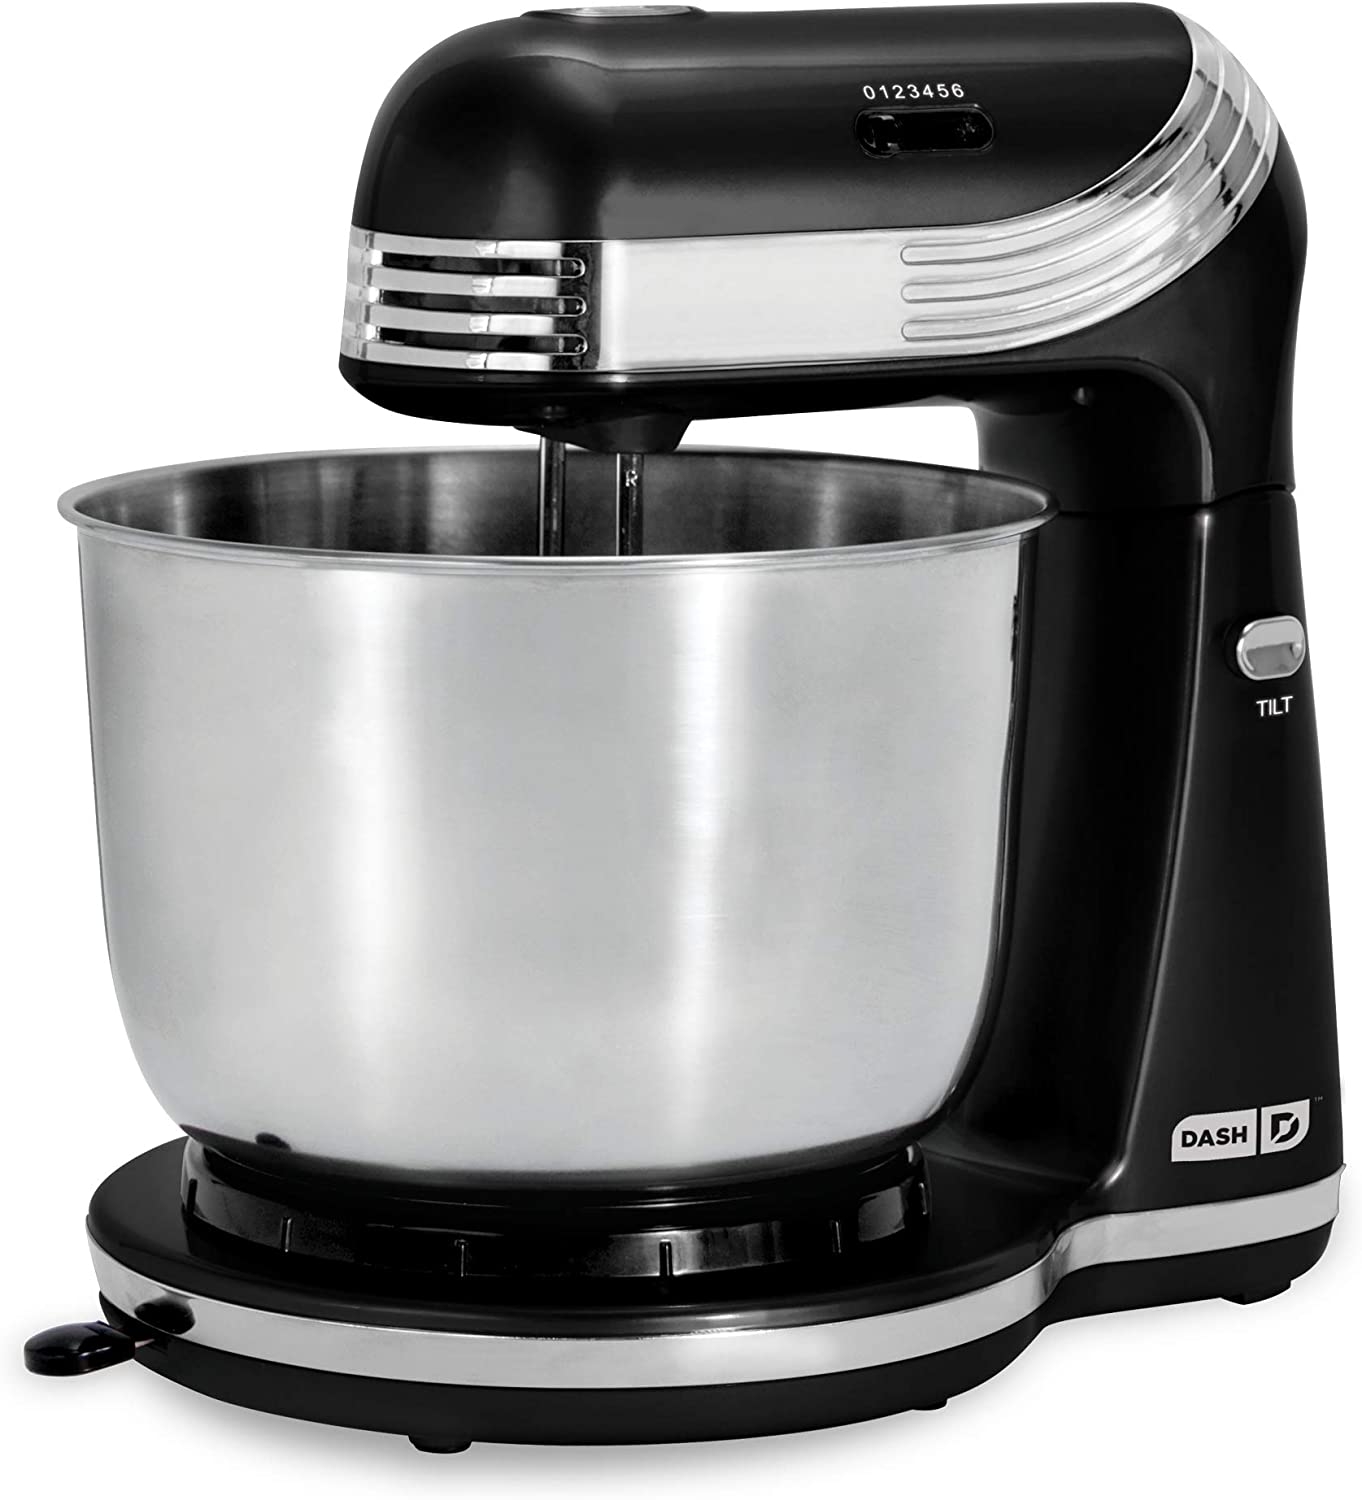 Dash Stand Mixer (Electric Mixer for Everyday Use): 6 Speed Stand Mixer with 3 Quart Stainless Steel Mixing Bowl, Dough Hooks &